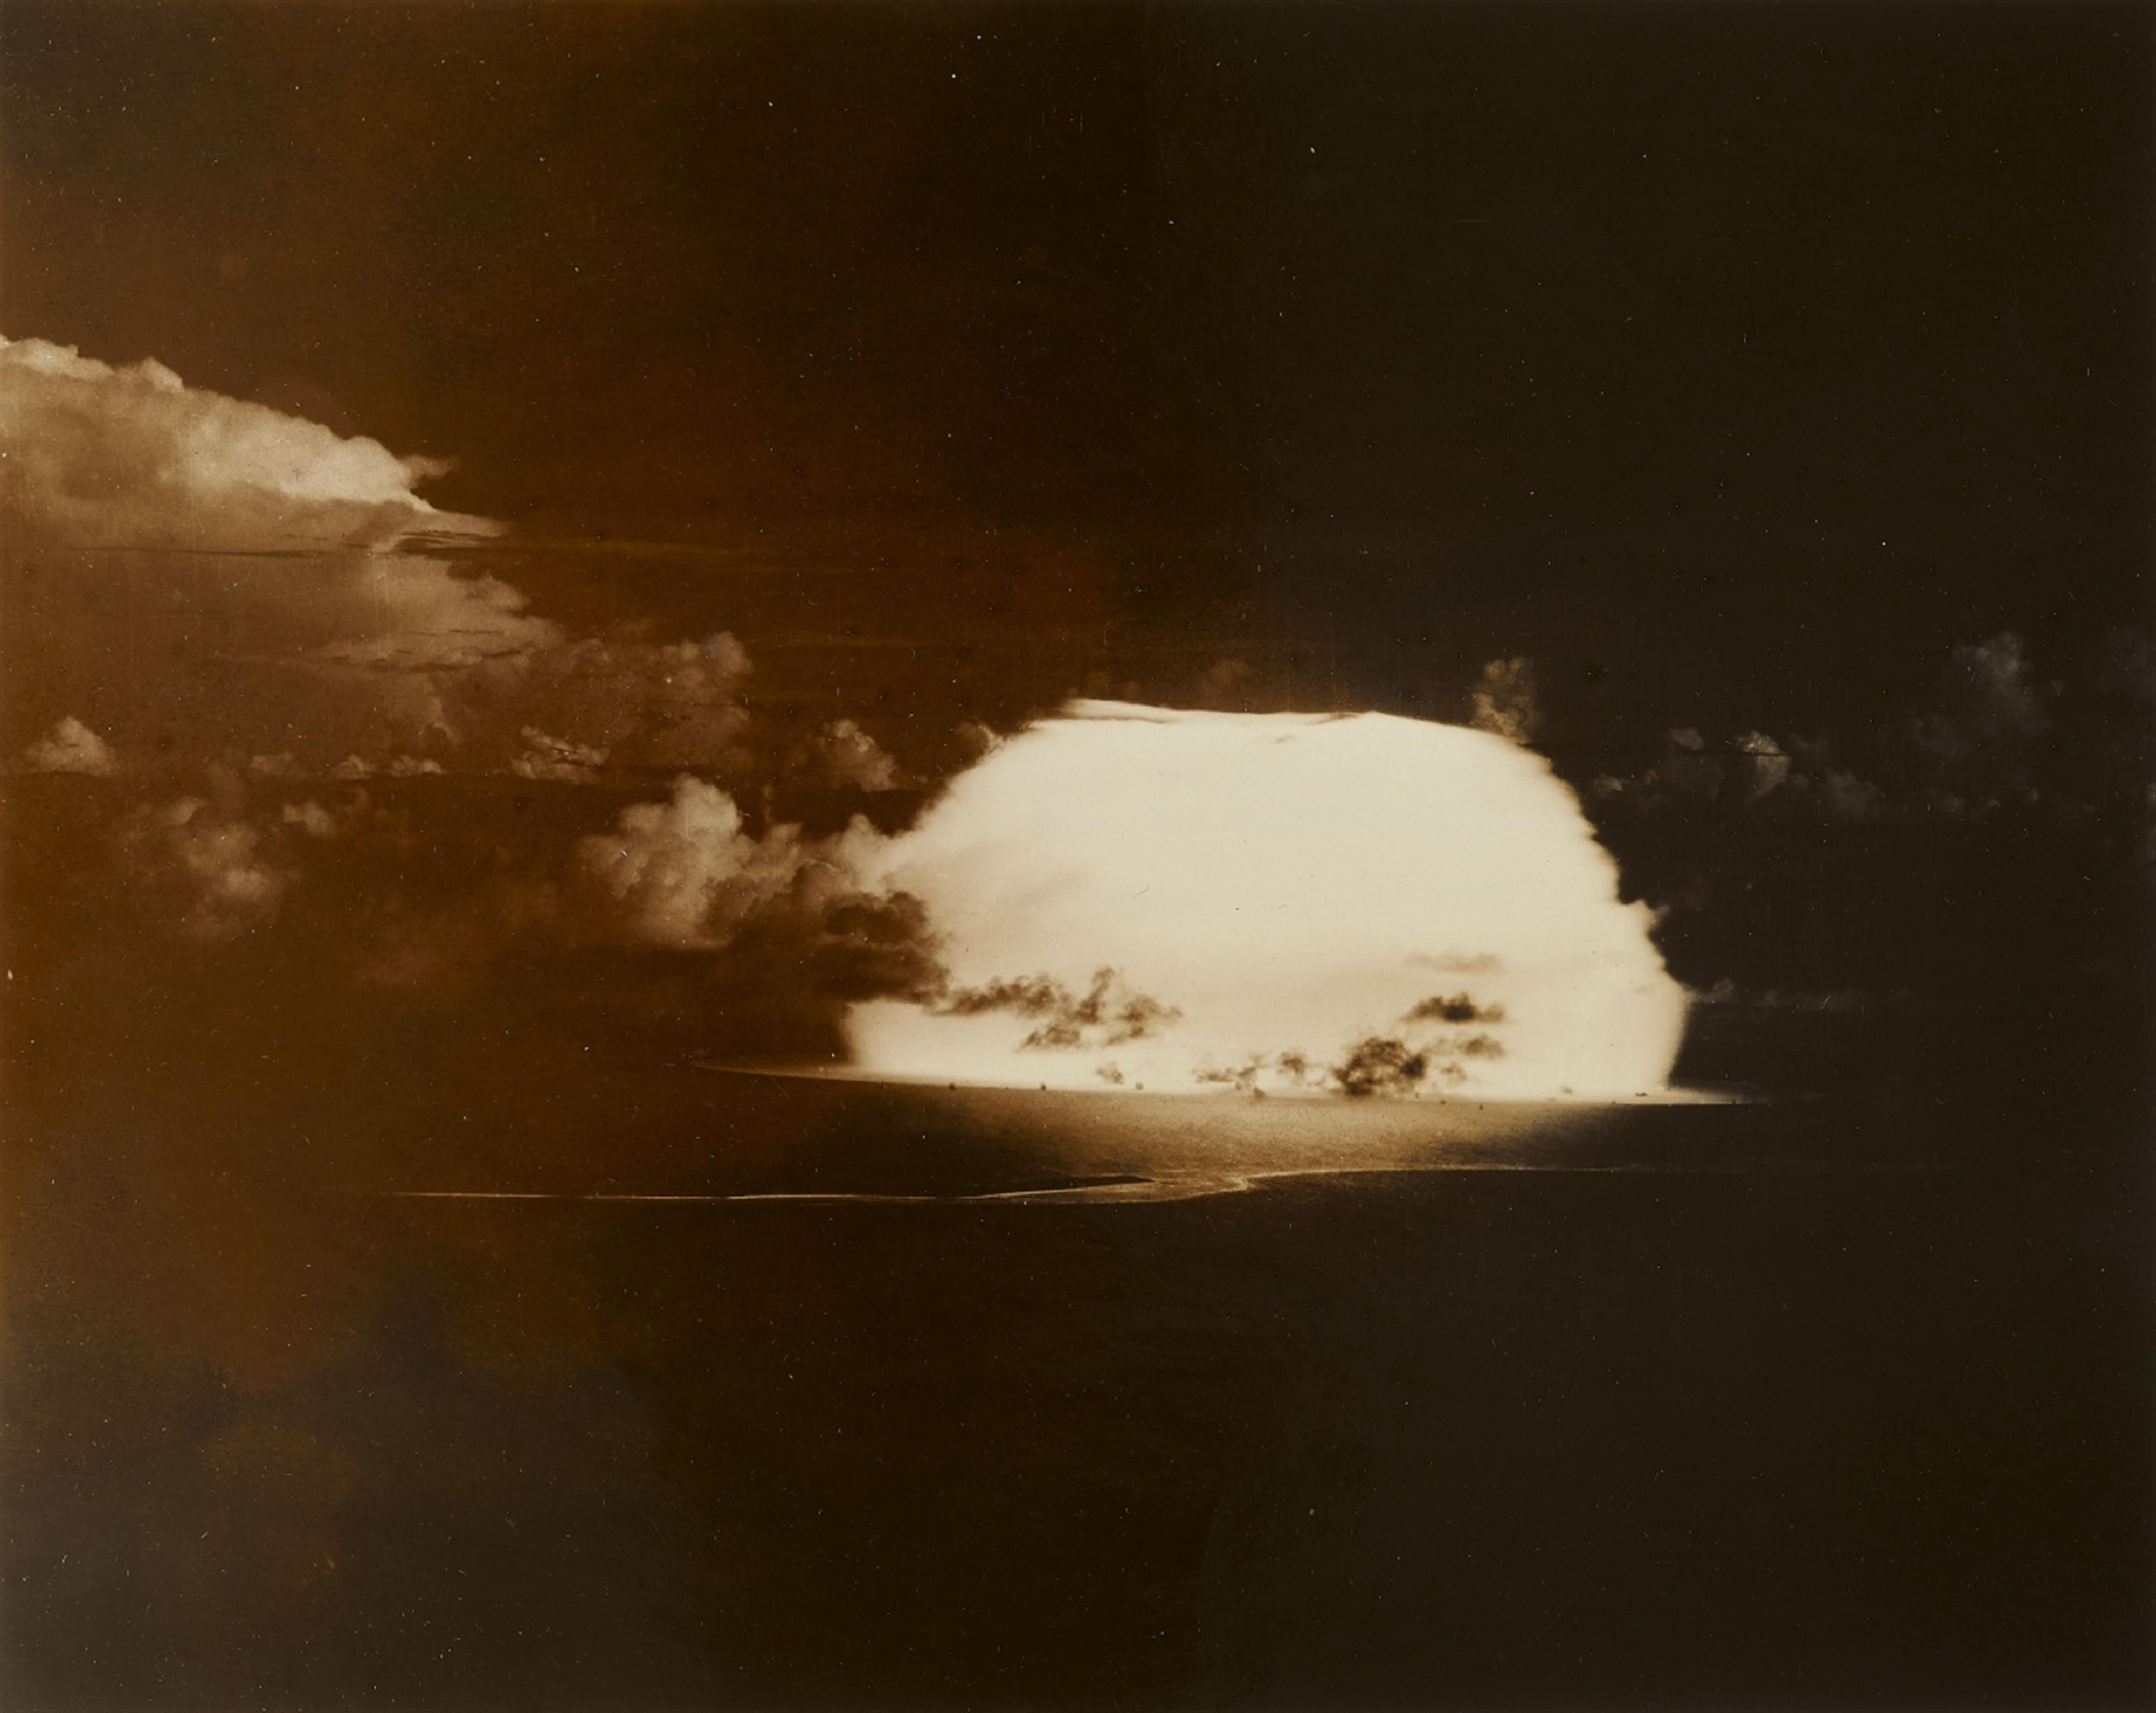 Joint Army Task Force One Photo - "Operation Crossroads" - Views of the Bikini Atoll nuclear Tests - image-8